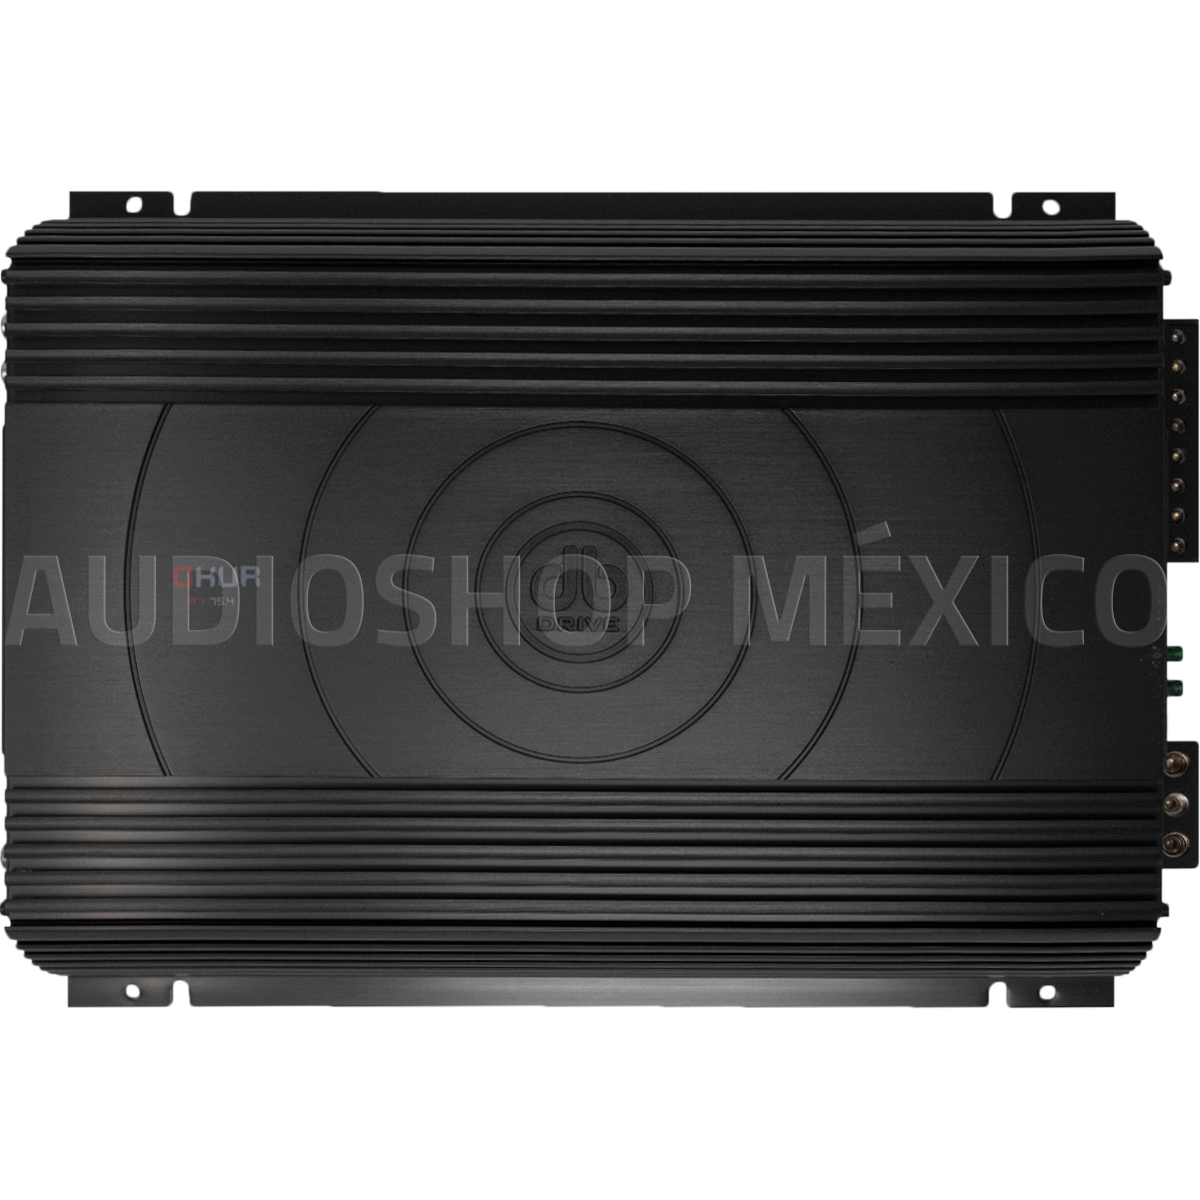 Amplificador 4 Canales DB Drive A7 75.4 500 Watts Clase AB 2 Ohms Open Show SPL Okur Series